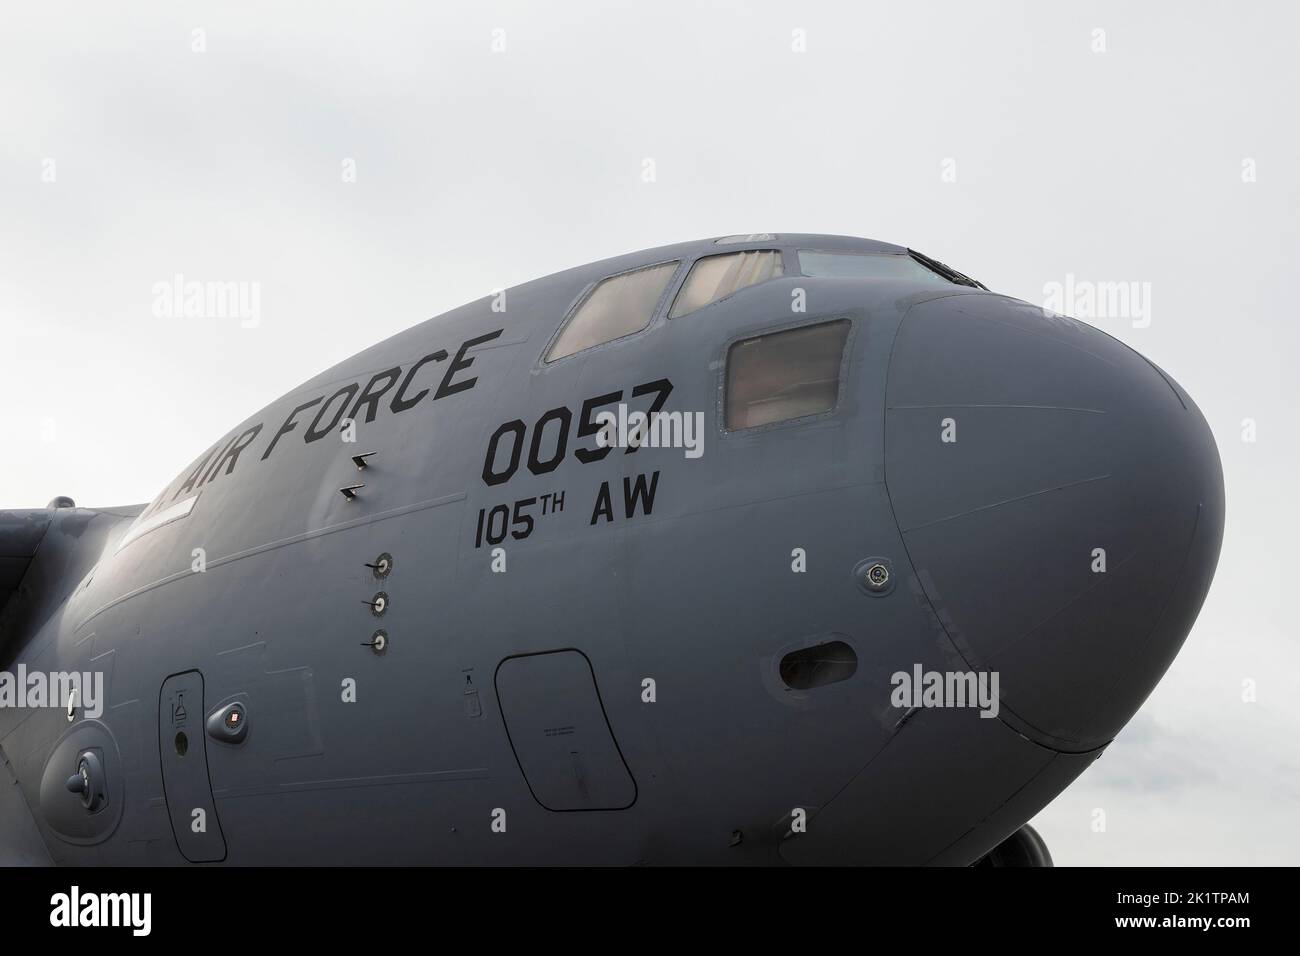 Mosnov, Czech Republic, Czechia - September 17, 2022: Detail of Boeing C-17 Globemaster III from US Air force. Military aircraft and airplane. Stock Photo